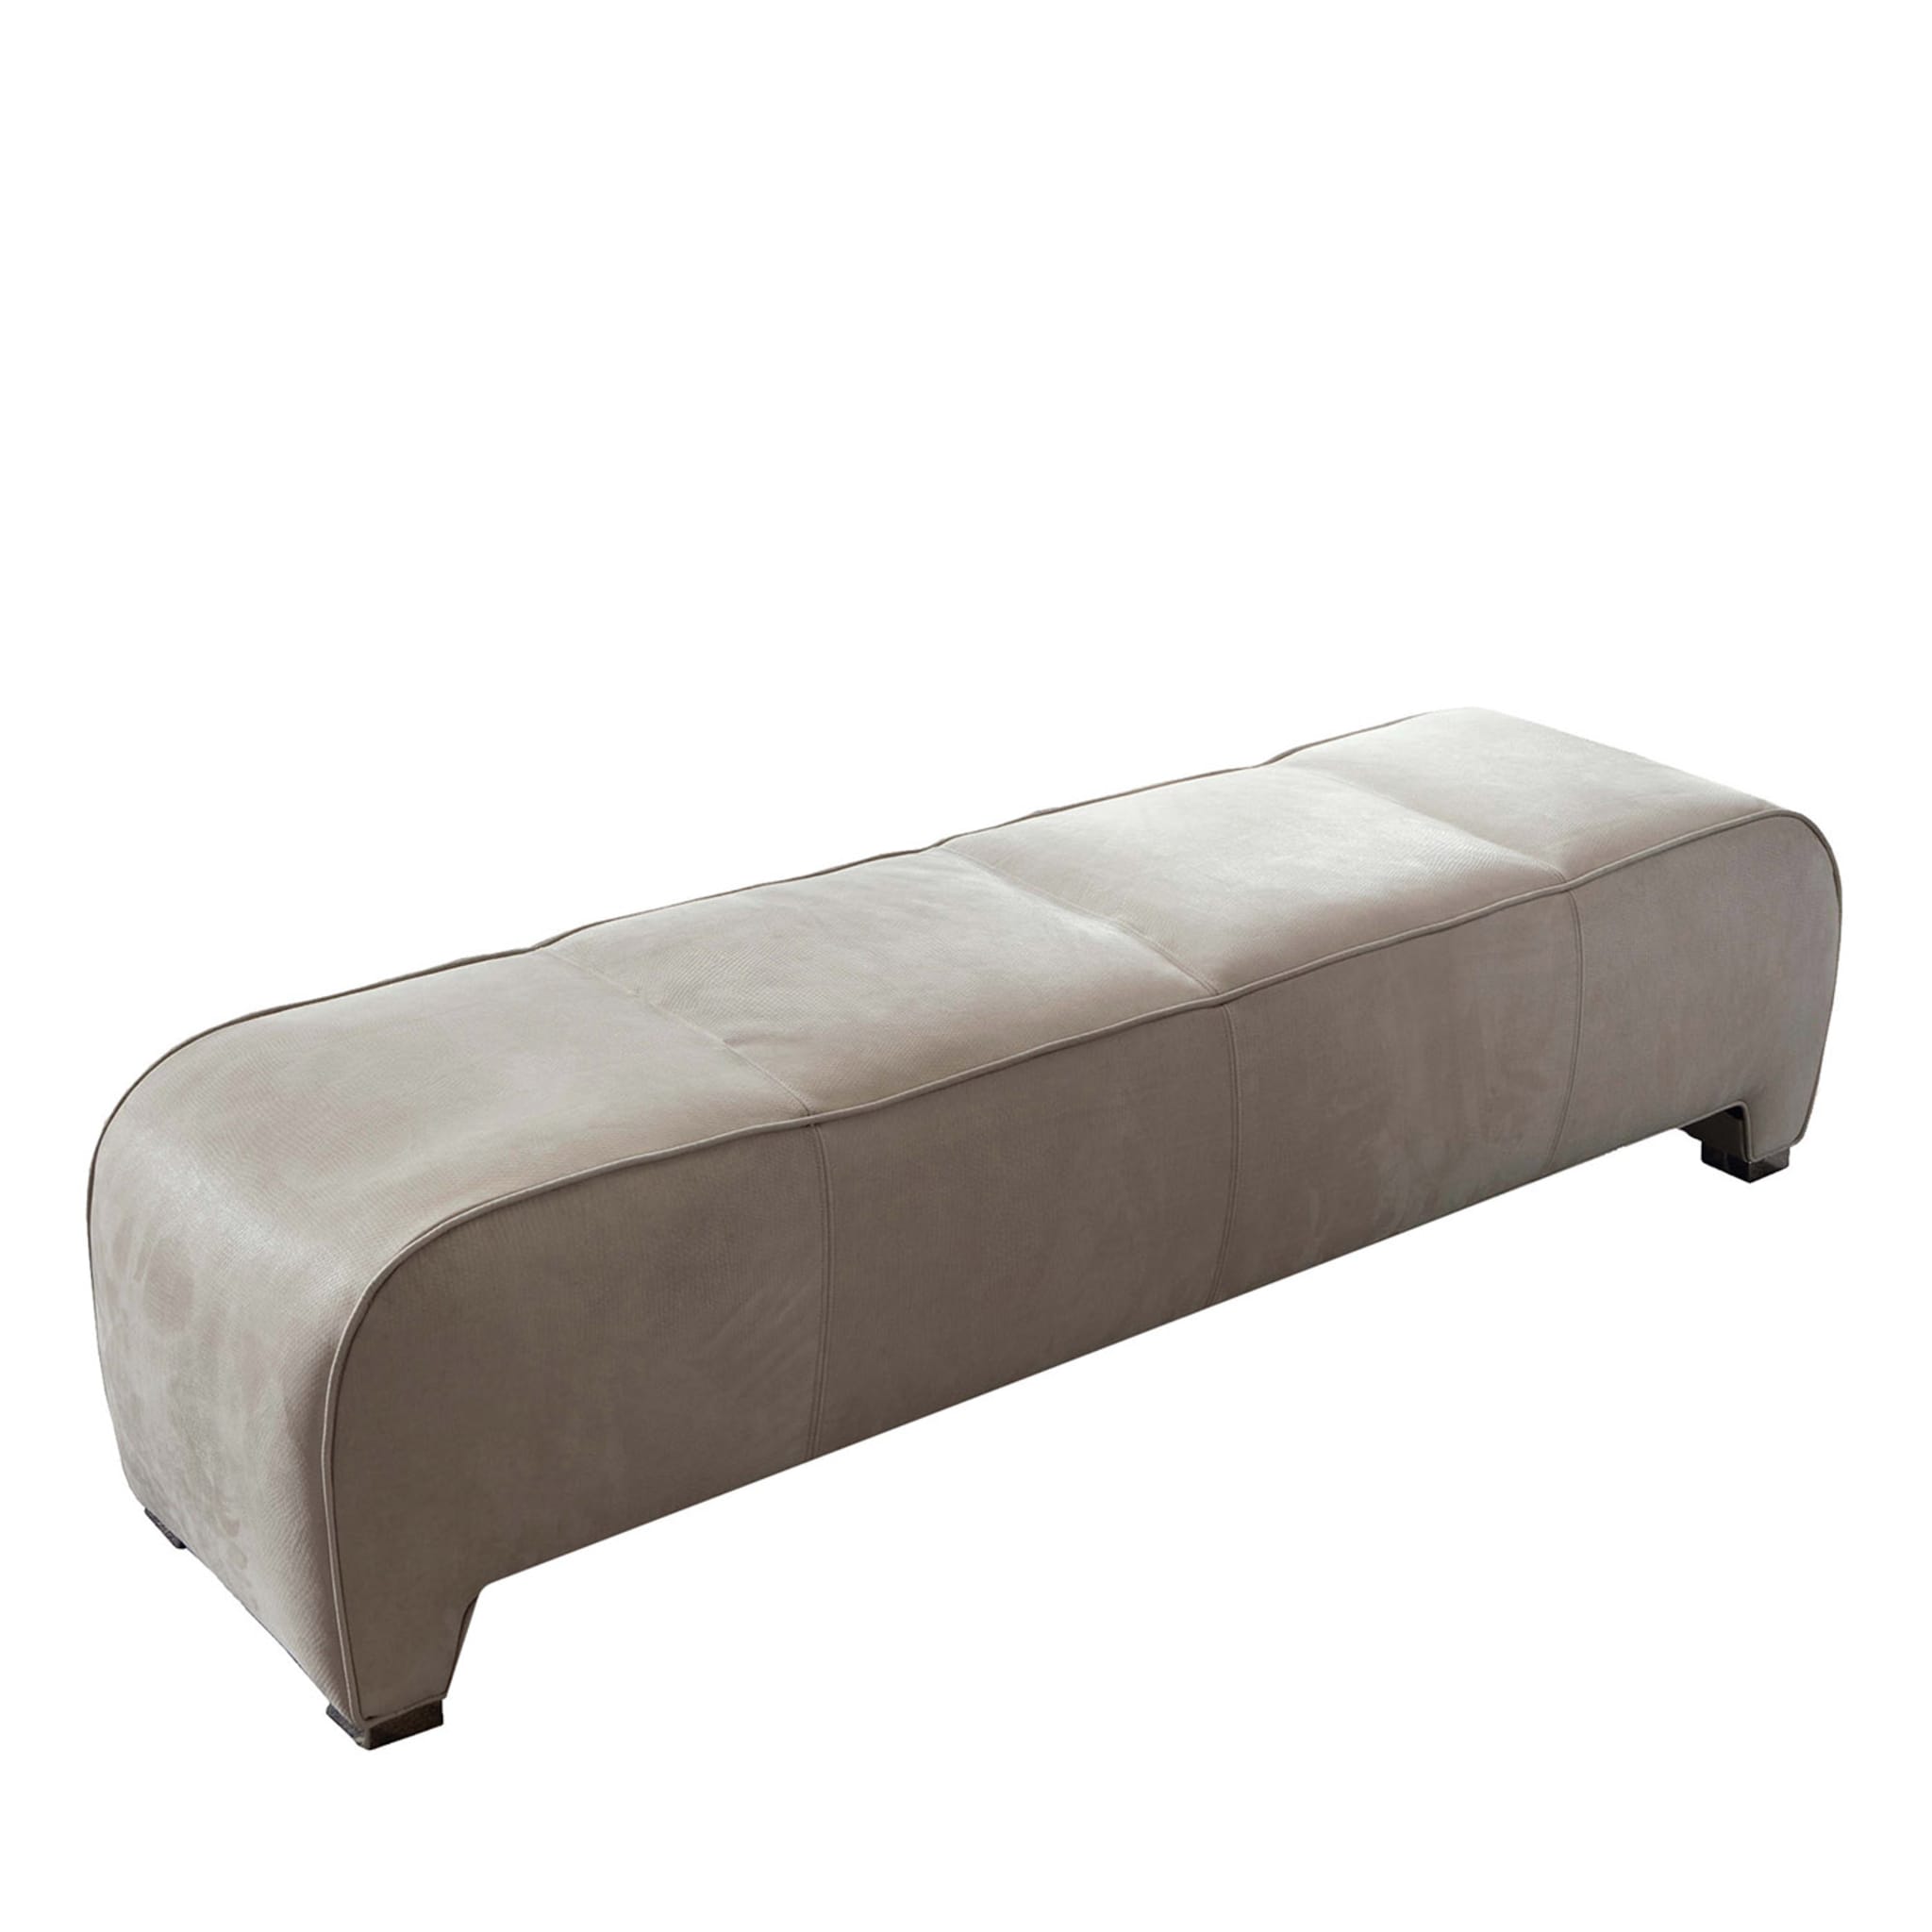 Beige Nabuk leather bench - Main view